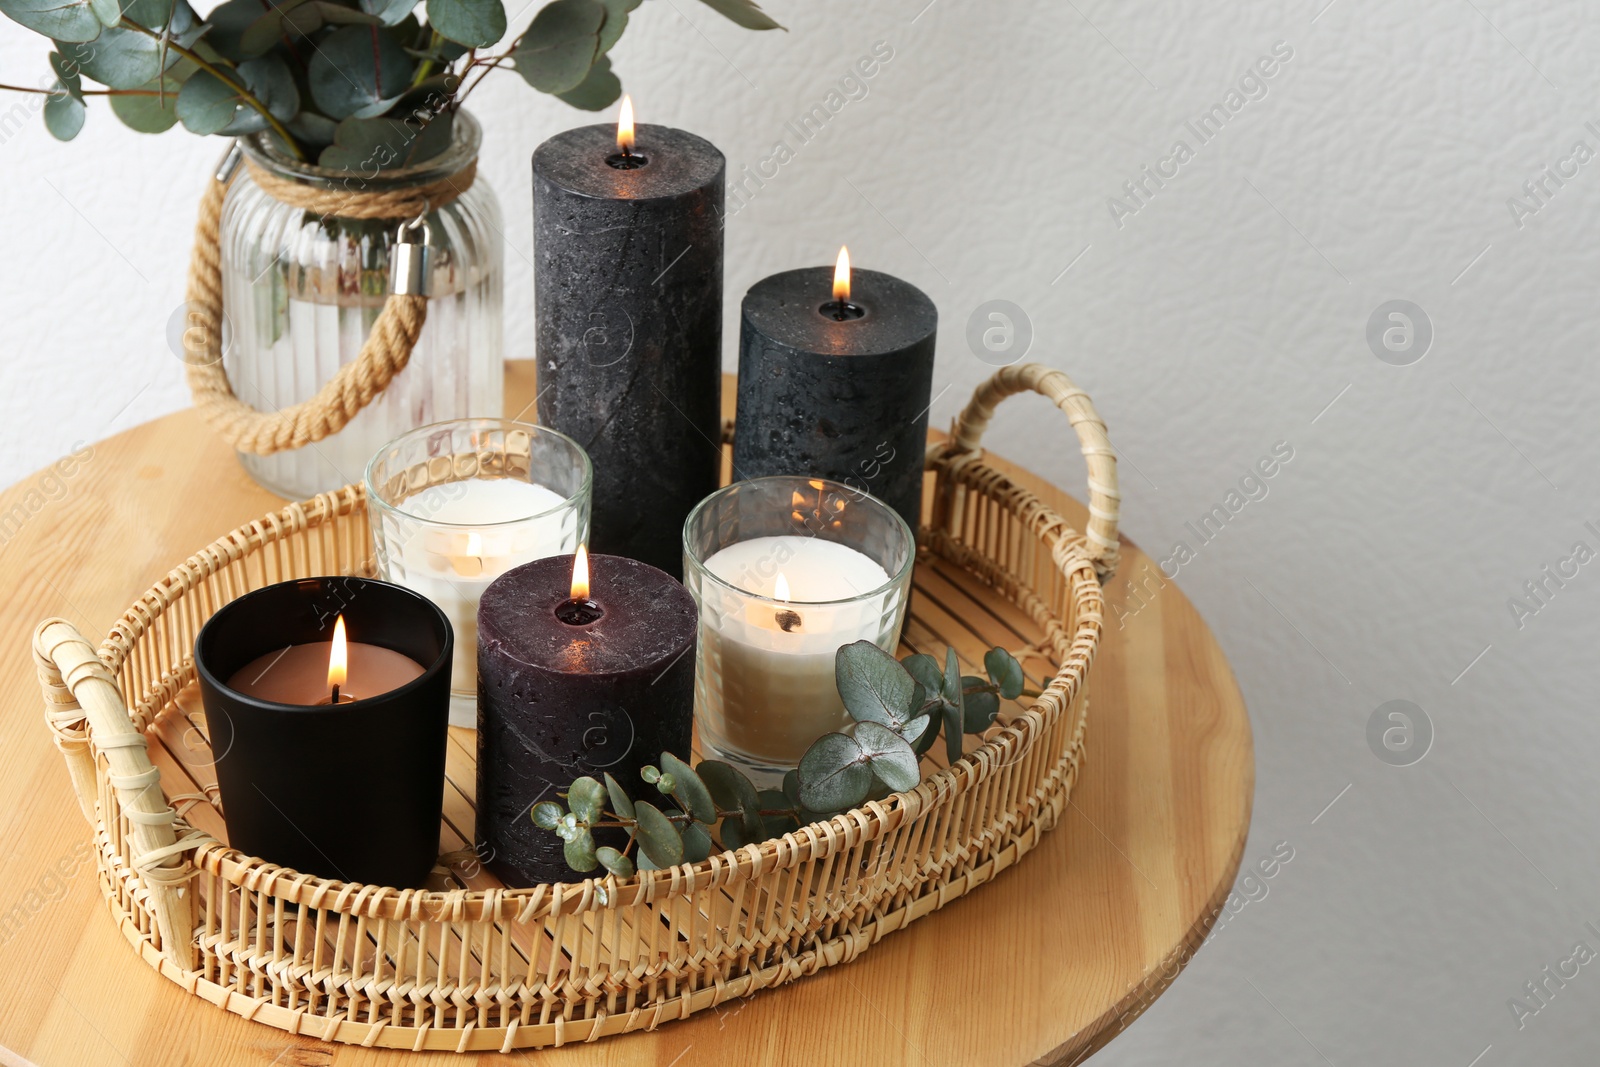 Photo of Tray with burning candles and green branches on table at white wall, space for text